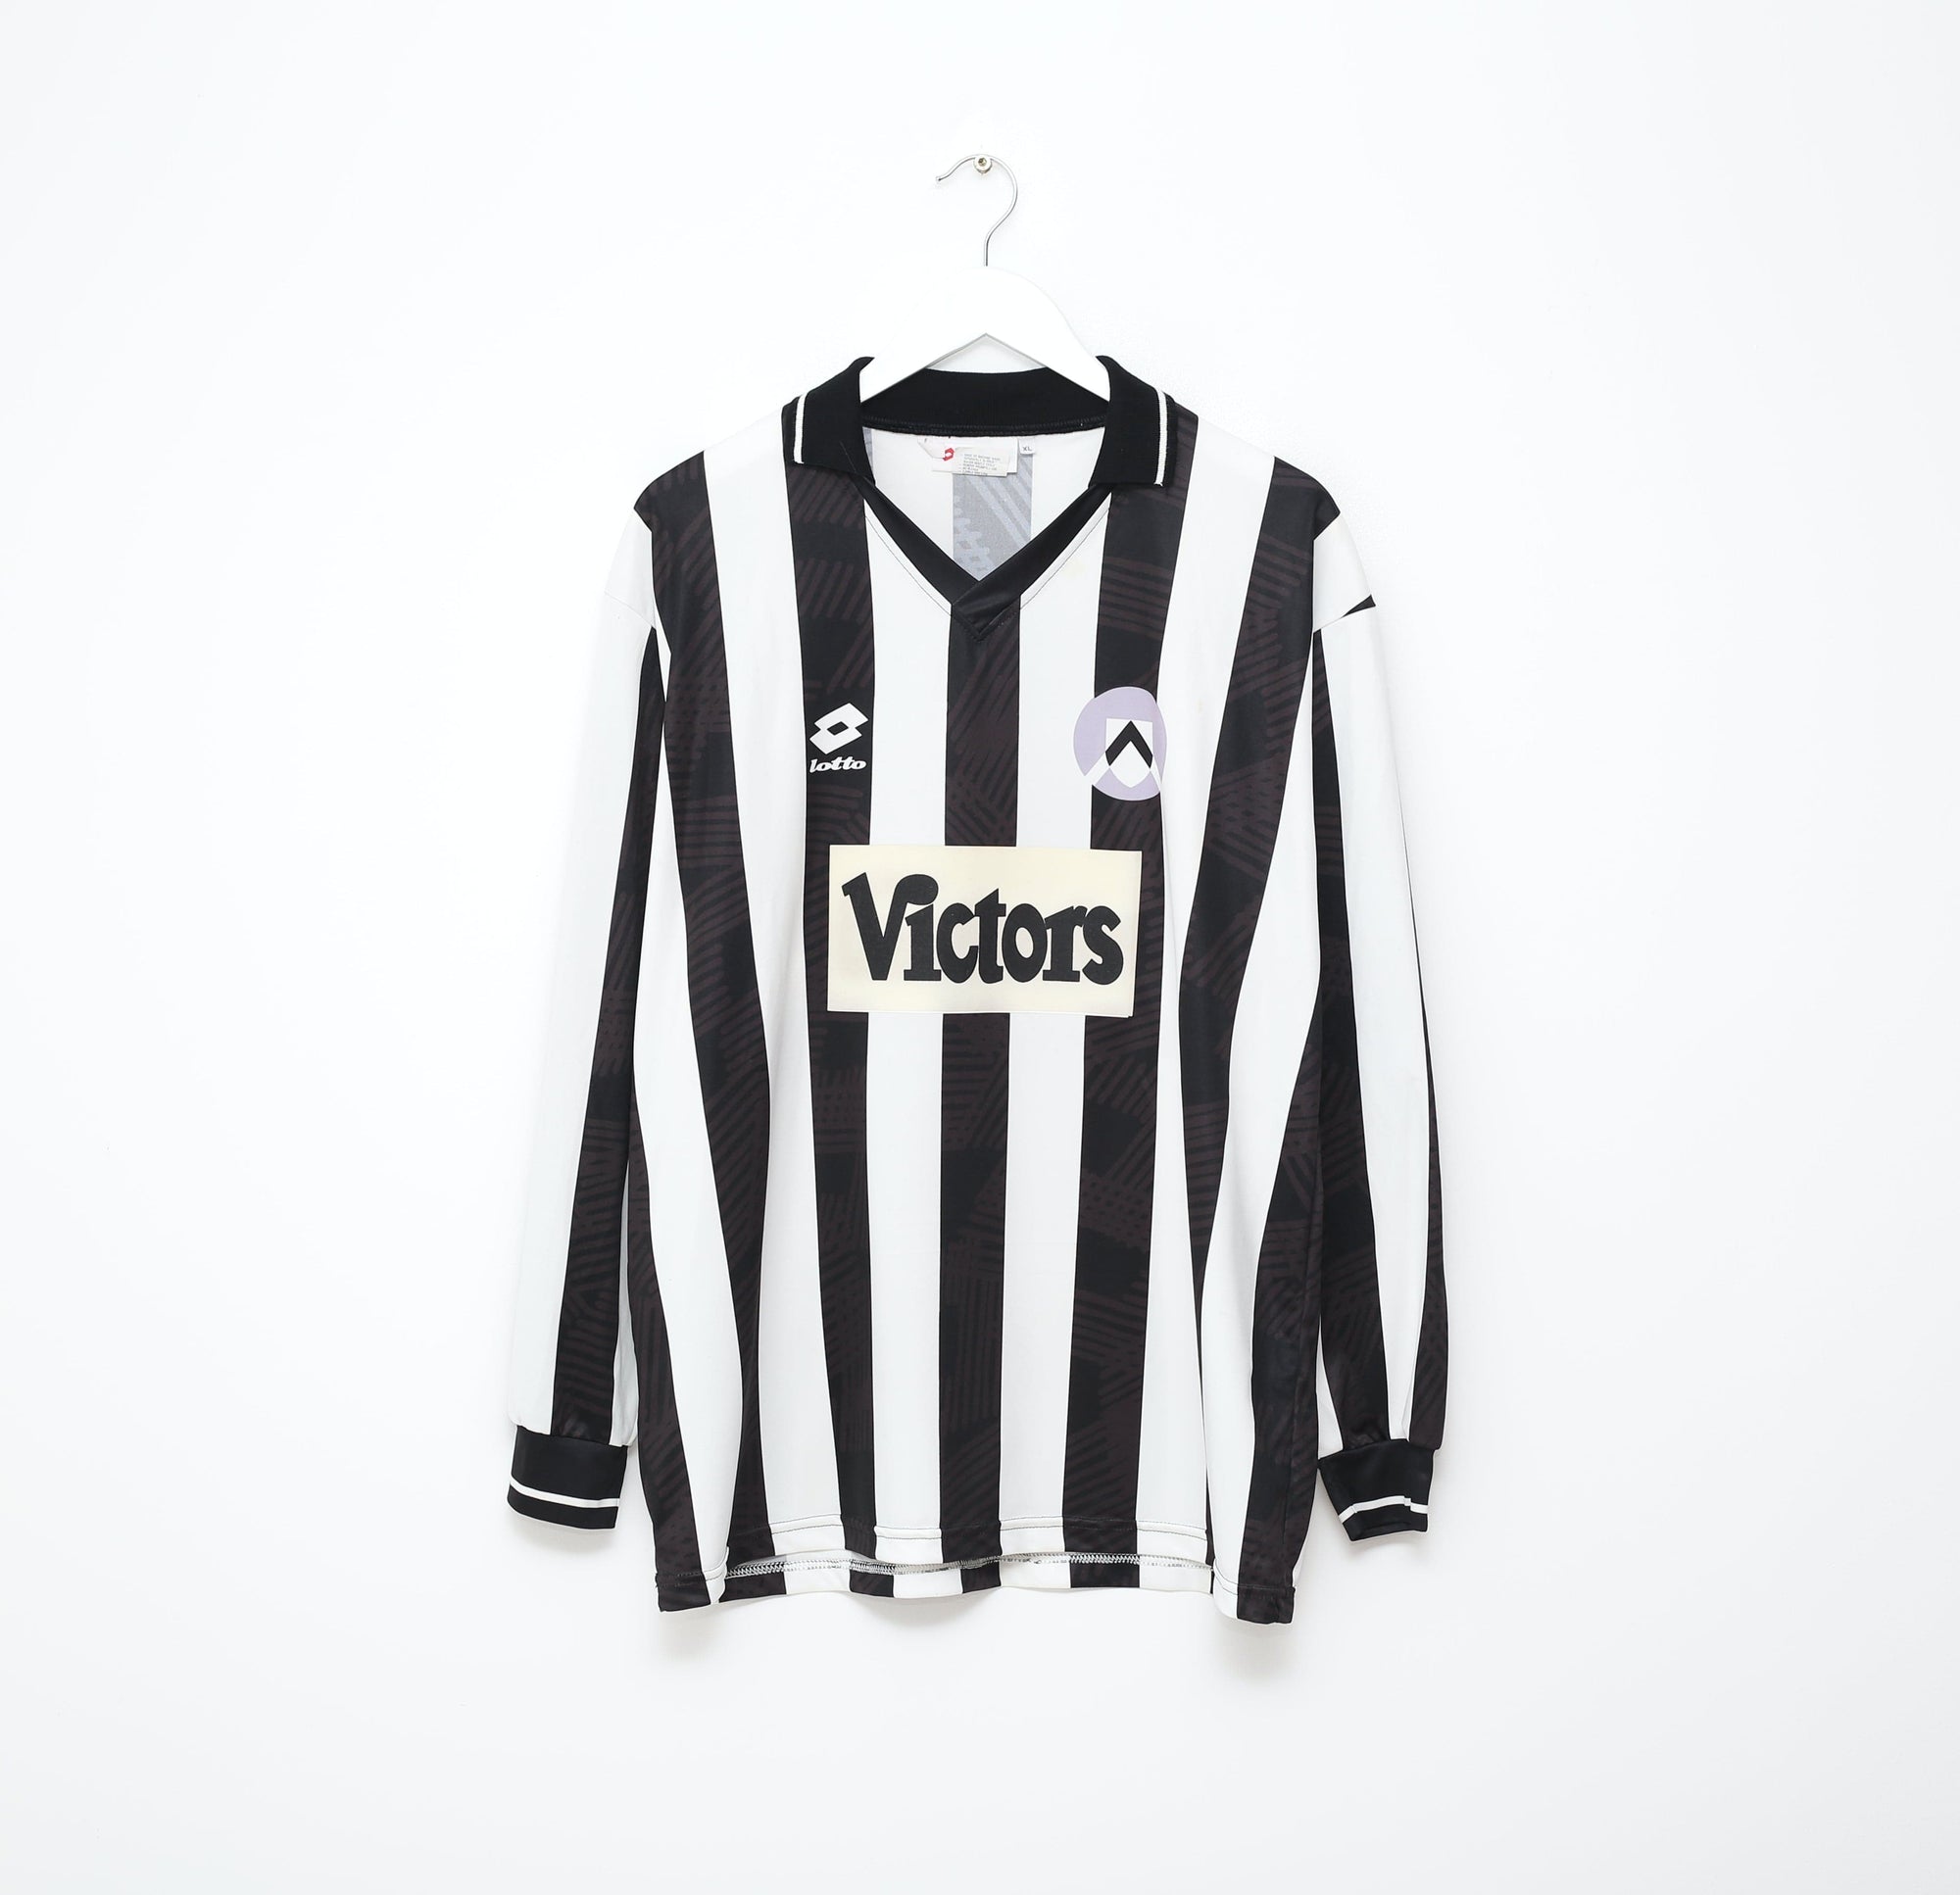 1993/94 BRANCA #9 Udinese Vintage Lotto Long Sleeve Home Football Shirt (L/XL)